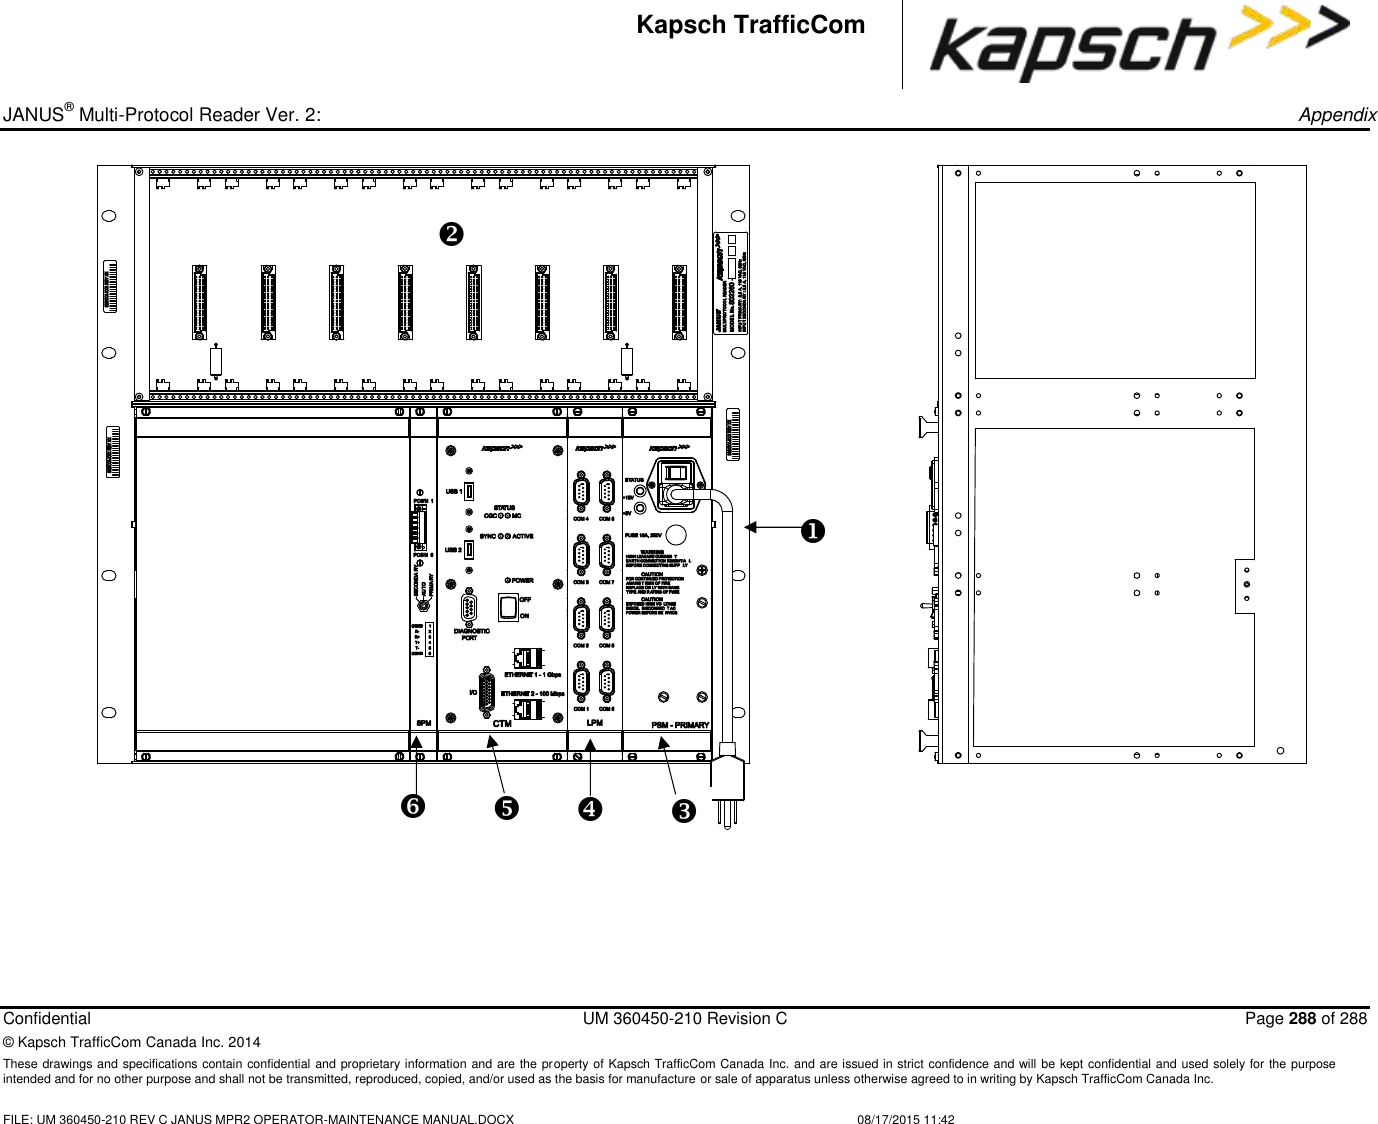 _ JANUS® Multi-Protocol Reader Ver. 2:     Appendix  Confidential  UM 360450-210 Revision C  Page 288 of 288 © Kapsch TrafficCom Canada Inc. 2014 These drawings and specifications contain confidential and proprietary information and are the property of Kapsch TrafficCom Canada Inc. and are issued in strict confidence and will be kept confidential and used solely for the purpose intended and for no other purpose and shall not be transmitted, reproduced, copied, and/or used as the basis for manufacture or sale of apparatus unless otherwise agreed to in writing by Kapsch TrafficCom Canada Inc.    FILE: UM 360450-210 REV C JANUS MPR2 OPERATOR-MAINTENANCE MANUAL.DOCX   08/17/2015 11:42 Kapsch TrafficCom                   